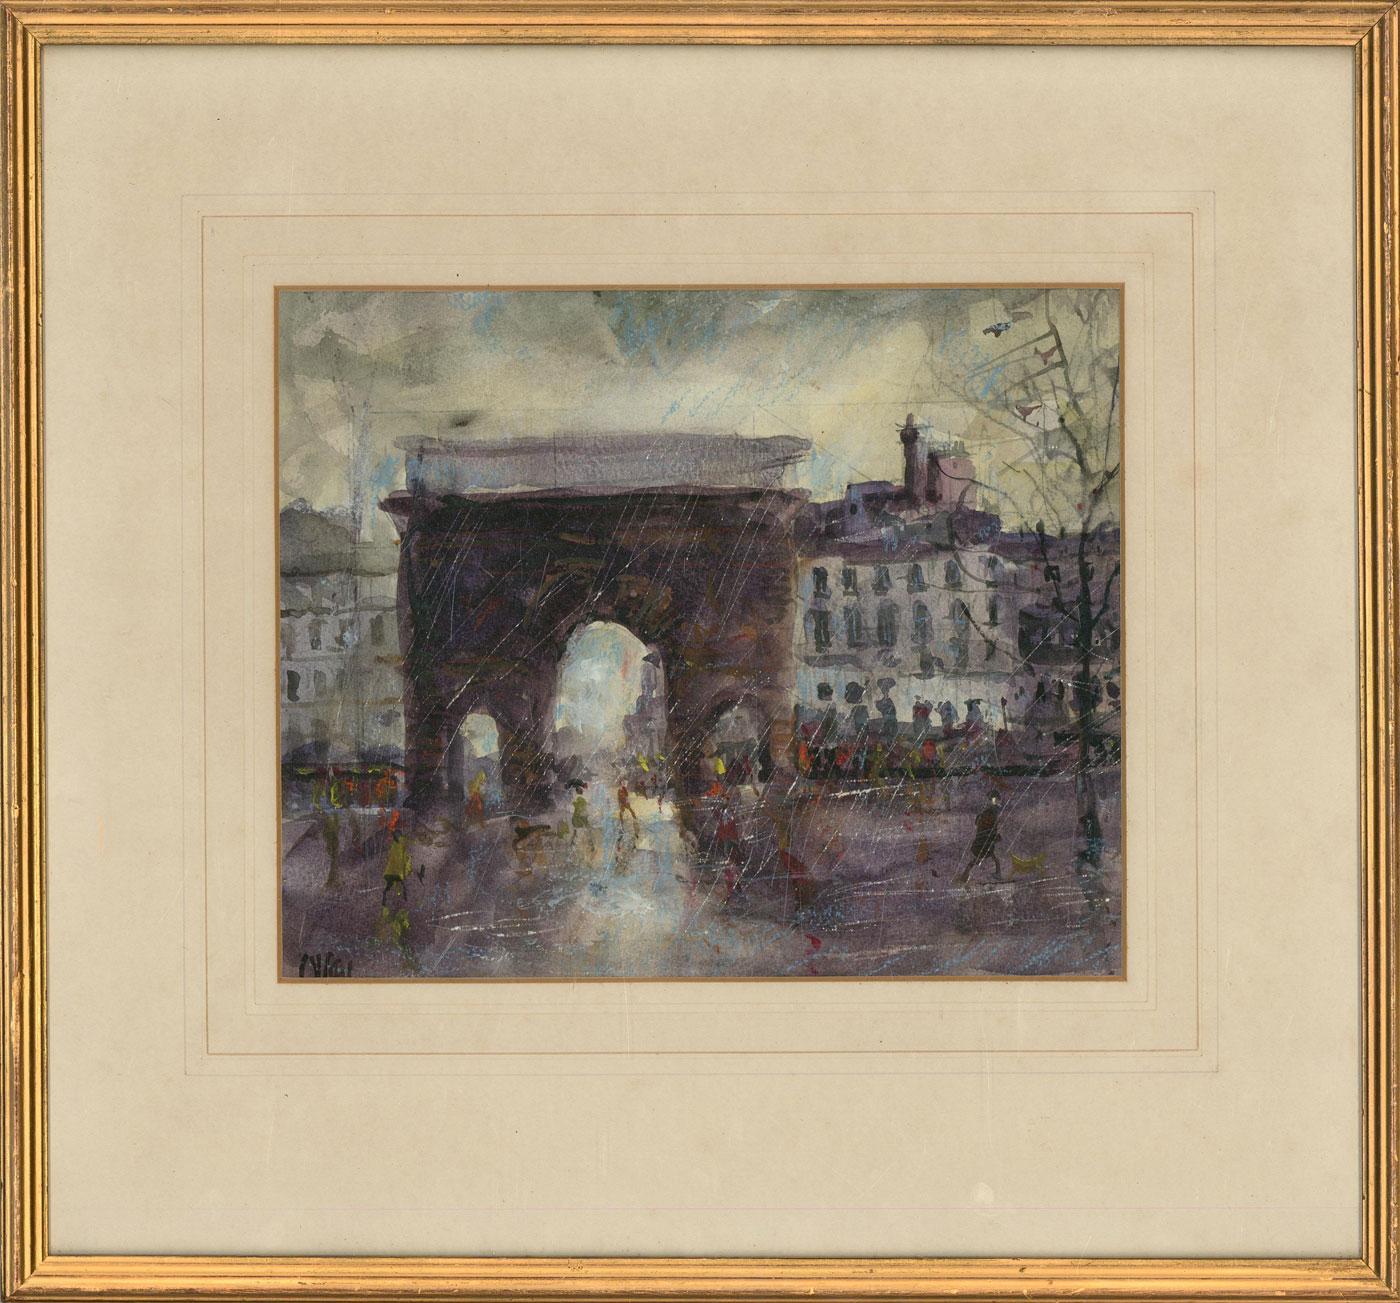 An expressive watercolour painting with gouache, pastel and sgraffito details by the British artist Ronald Olley. The scene depicts a rainy day in Paris with a view of Porte Saint-Martin.This monumental triumphal arch was built in 1674 at the order